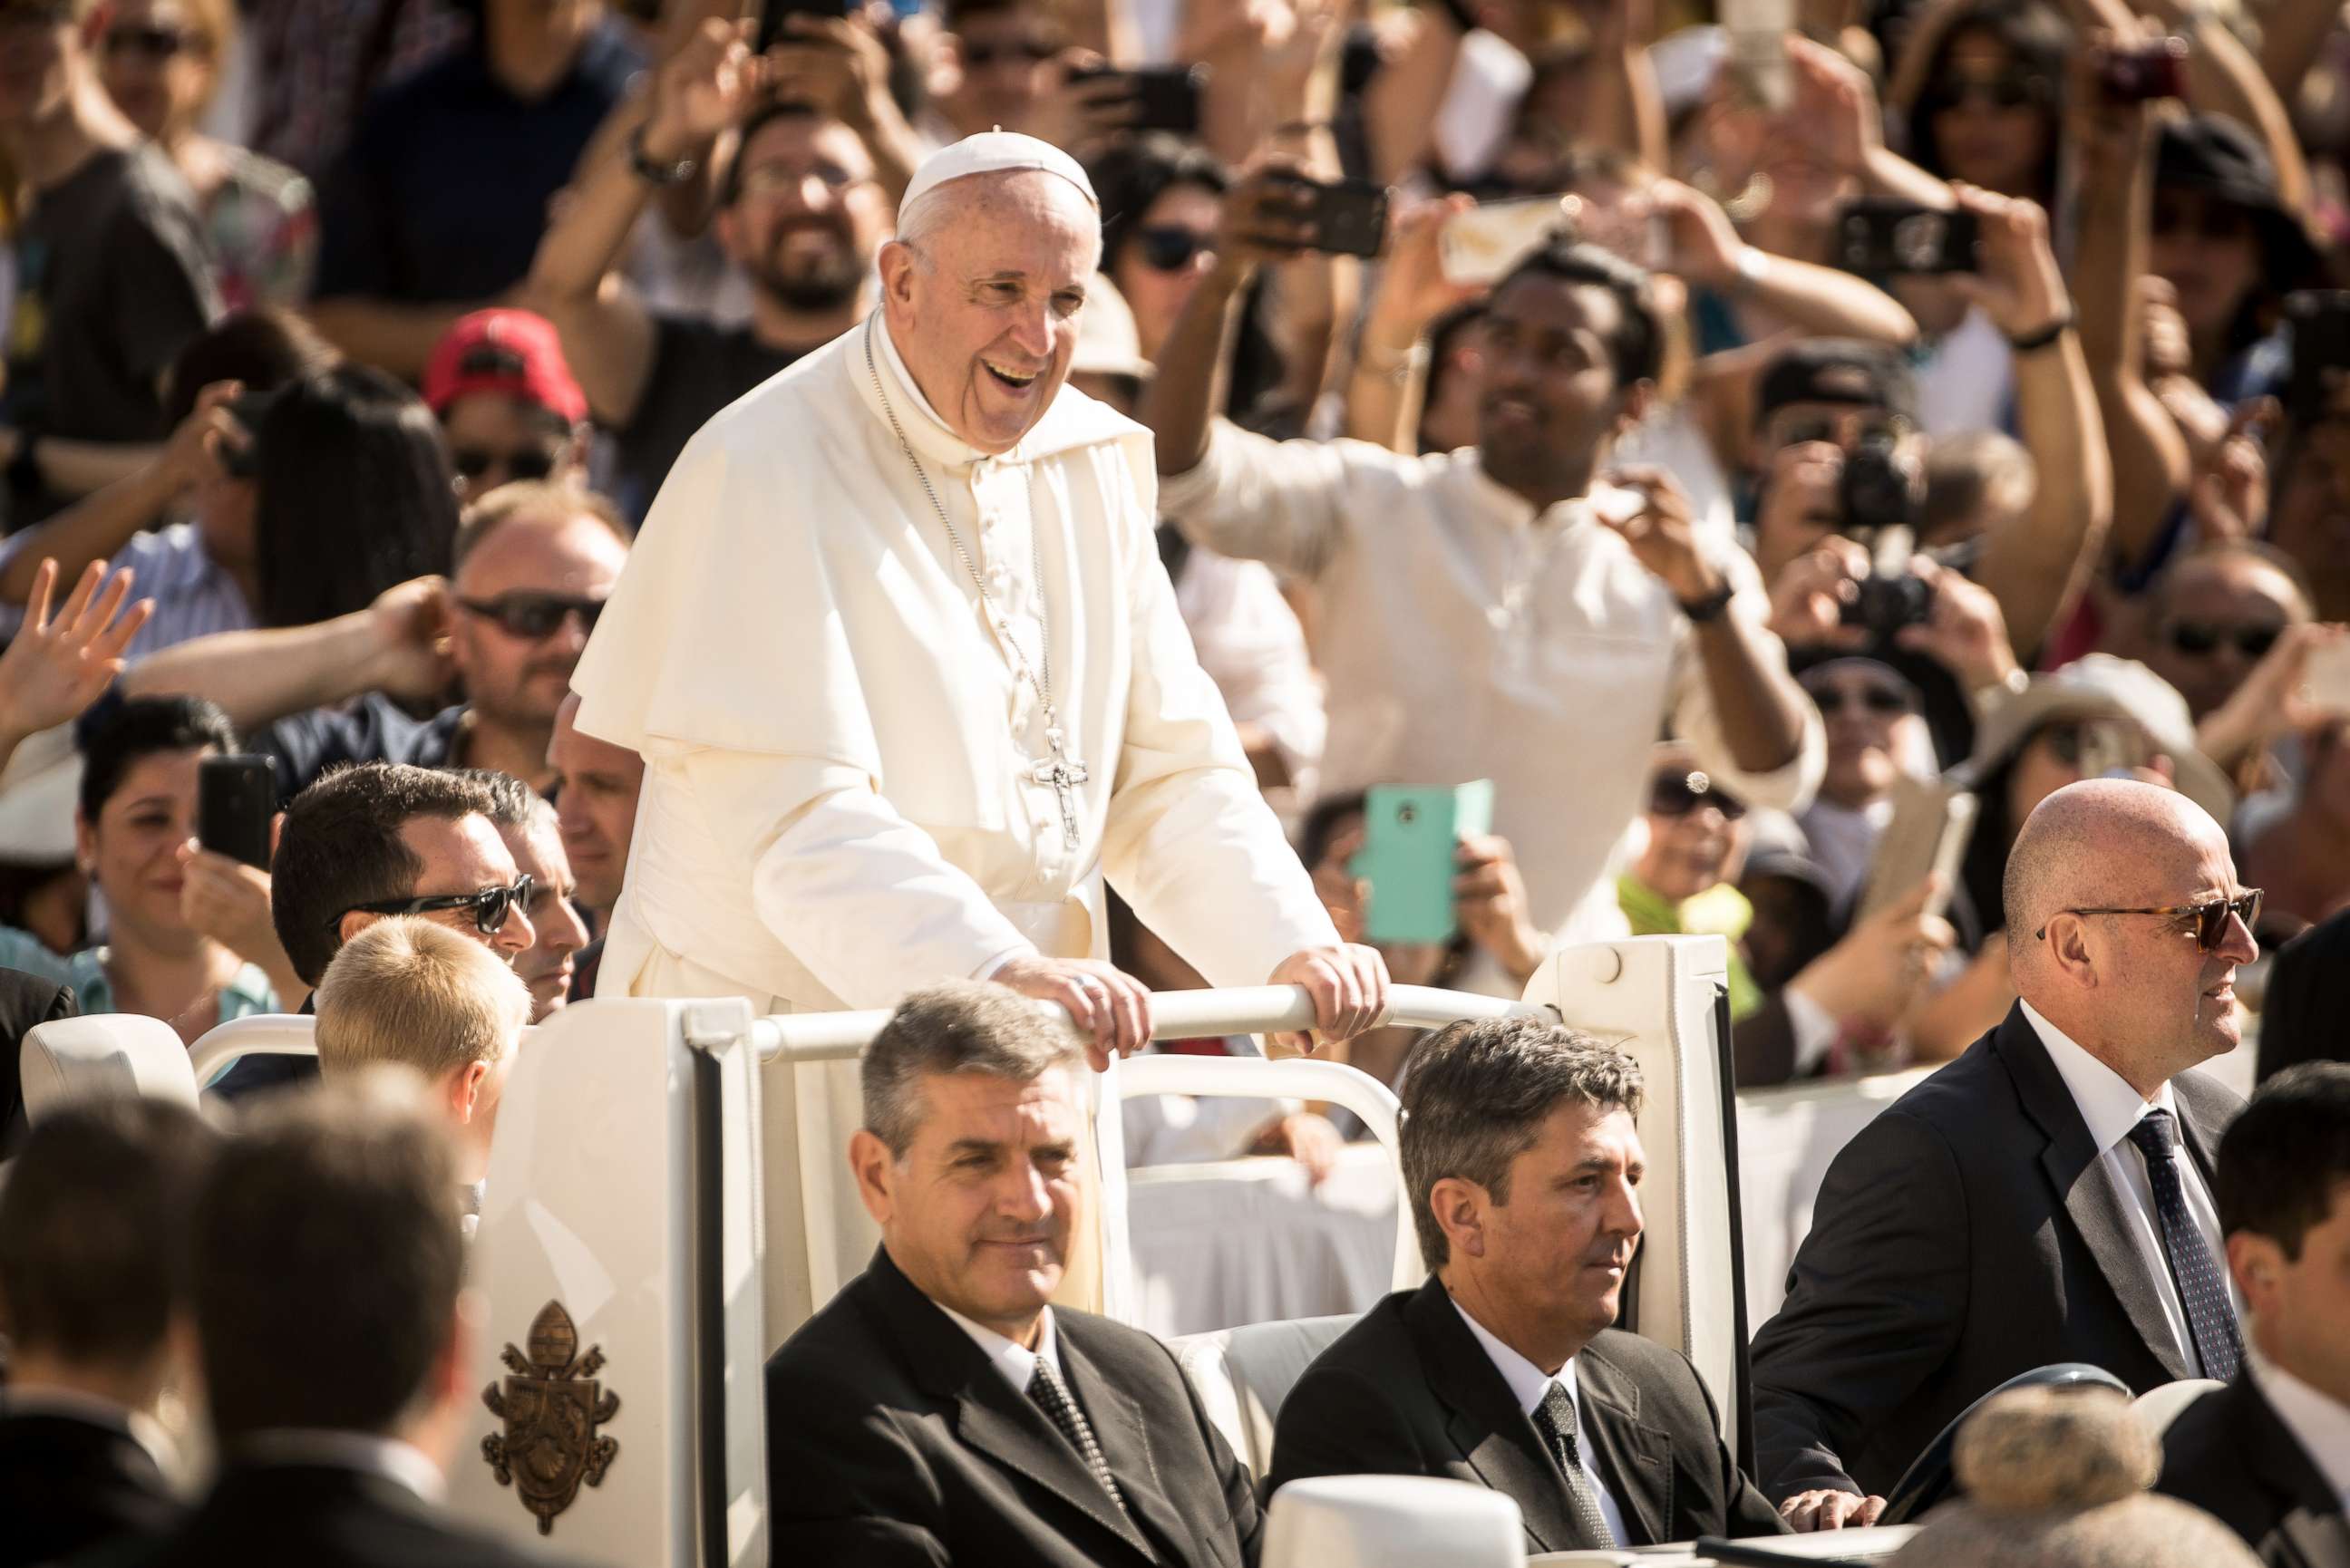 PHOTO: Pope Francis arrives at his General Weekly Audience in St. Peter's Square on Aug. 29, 2018, in Vatican City, Vatican.